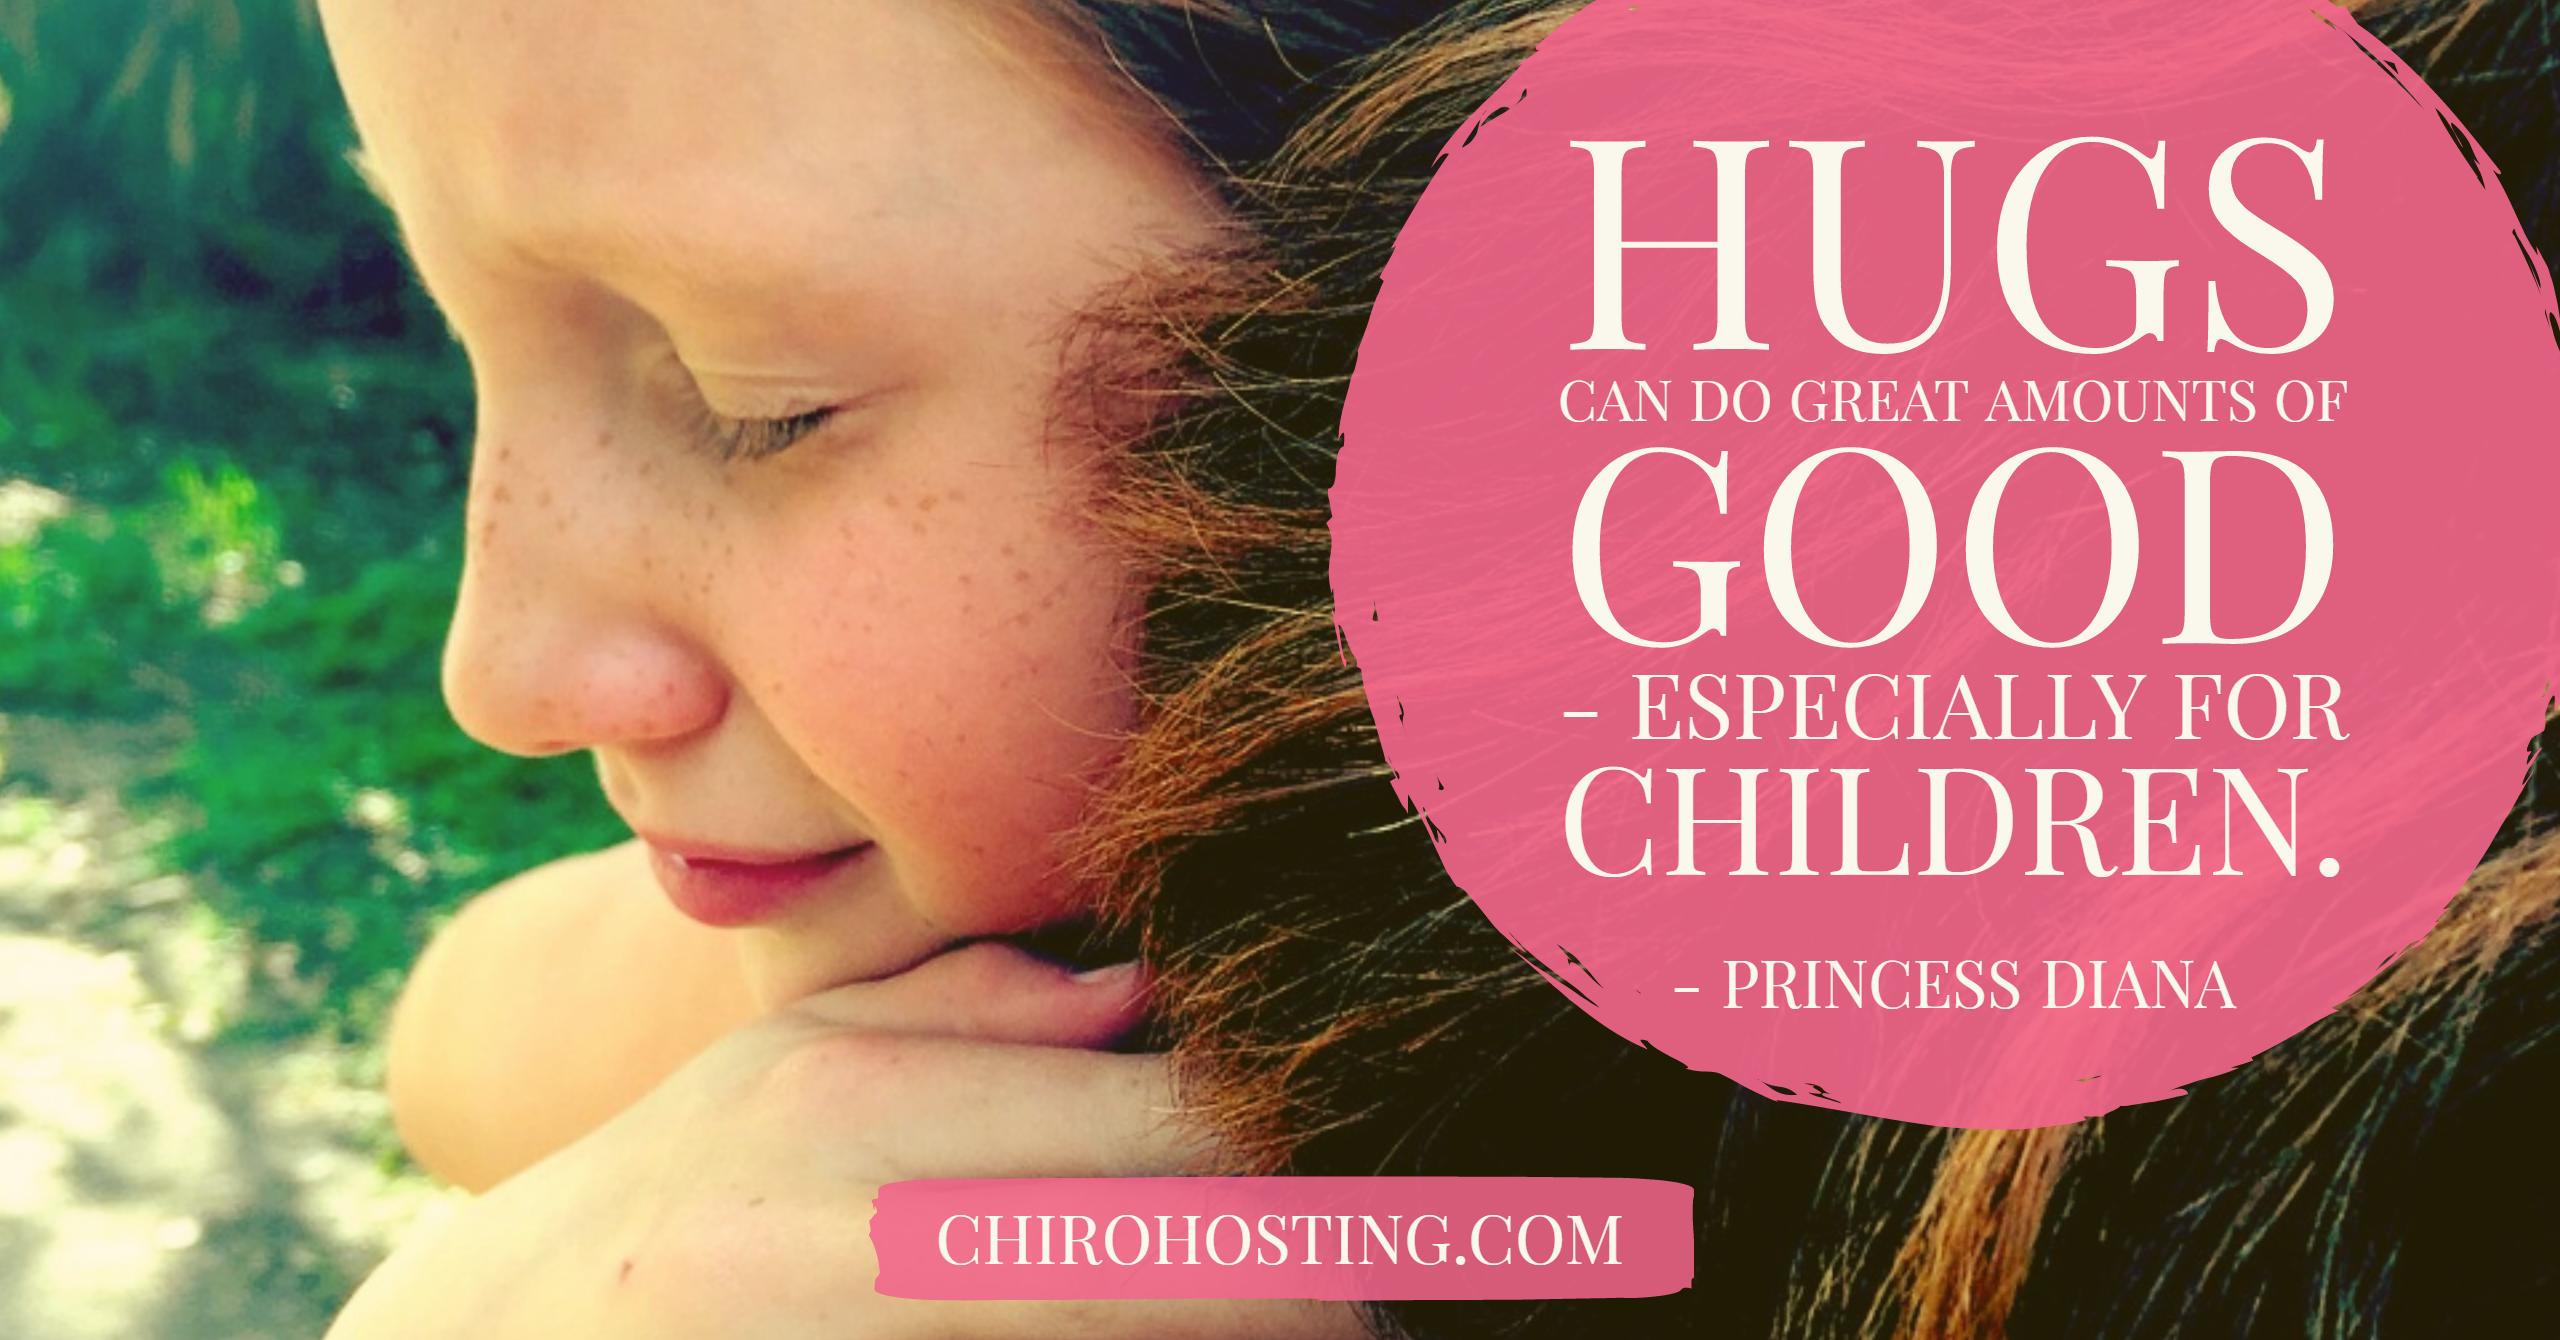 Hugs Can Do Great Amounts of Good - Especially for Children